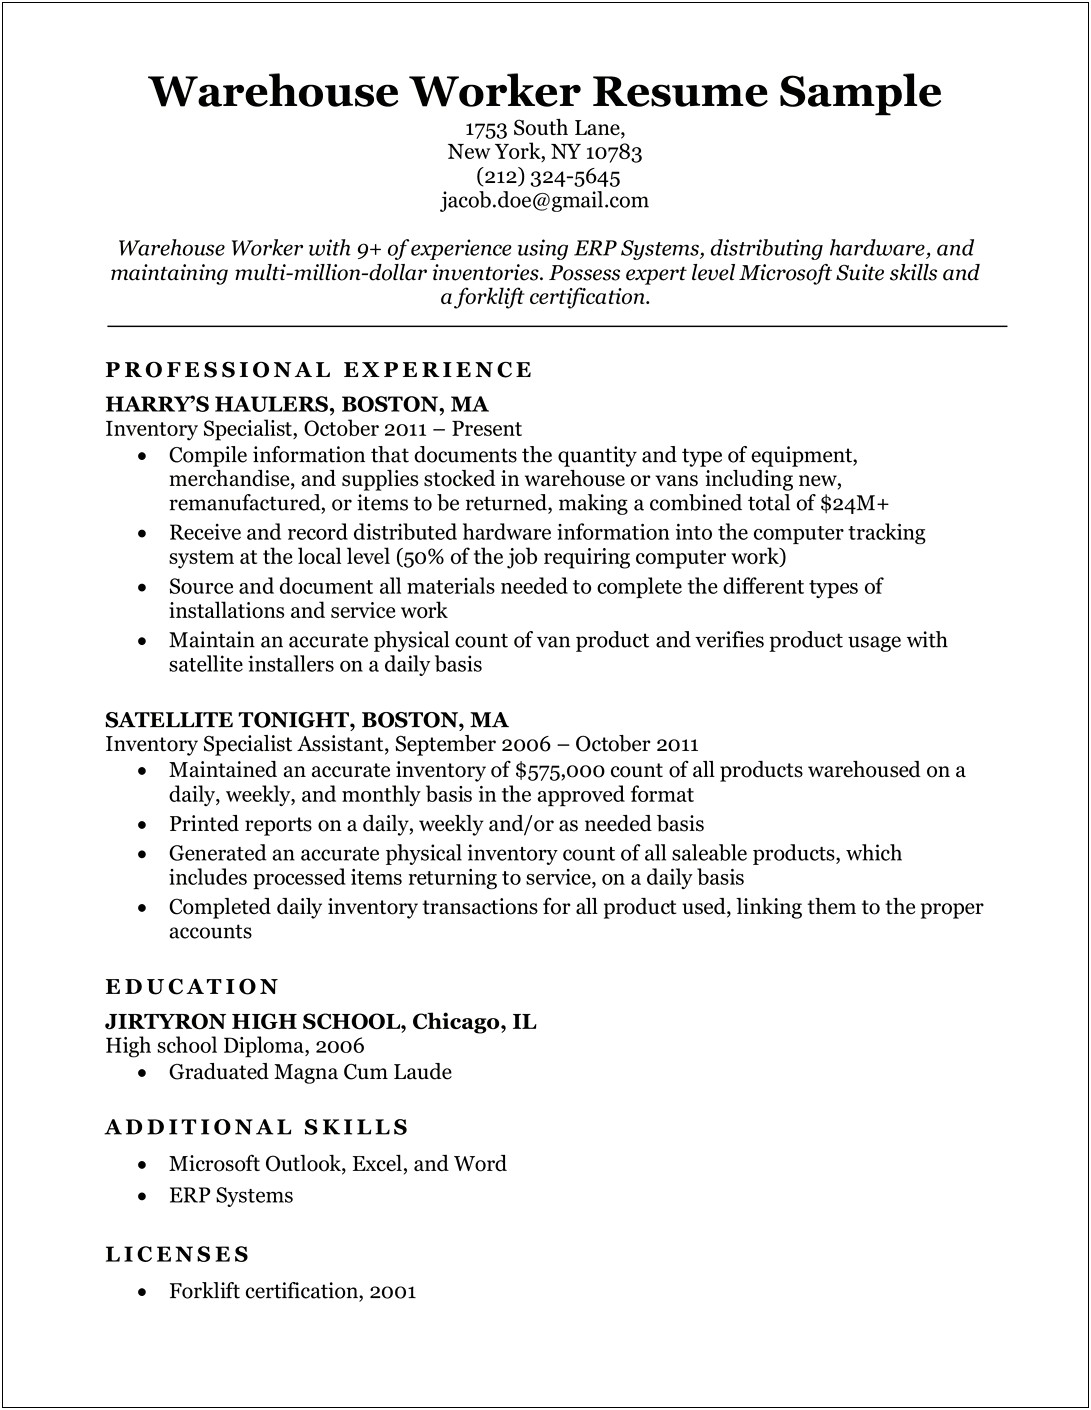 Resume To Give To Warehouse Job